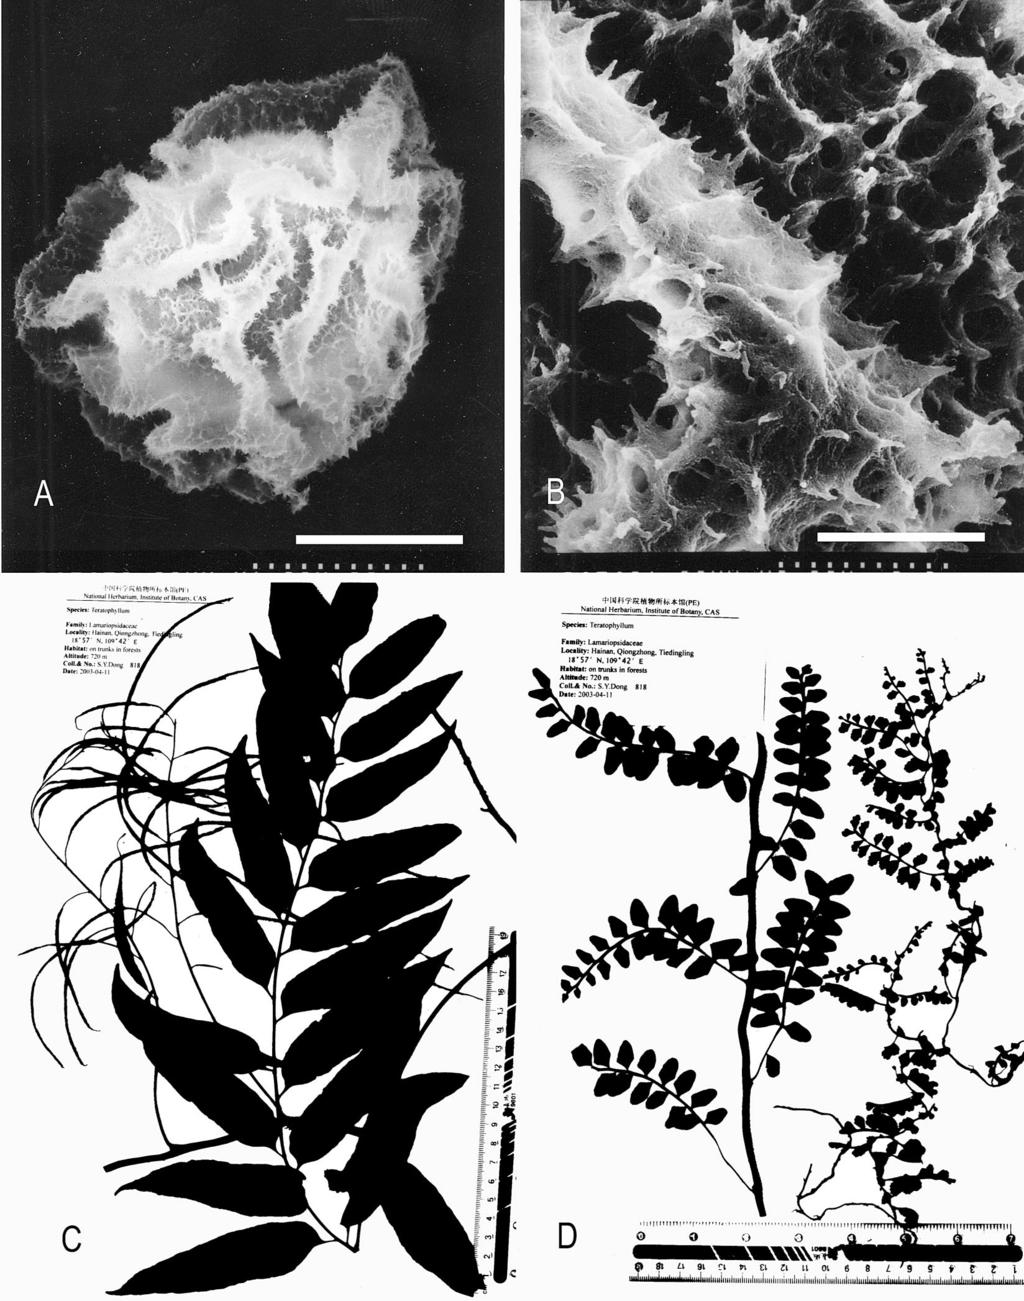 106 Novon Figure 2. Teratophyllum hainanense. A, B. SEM micrographs of spores. (A: scale bar 23.1 m; B: scale bar 3.8 m). C. Adult sterile and fertile leaves. D. Young and mature bathyphylls.